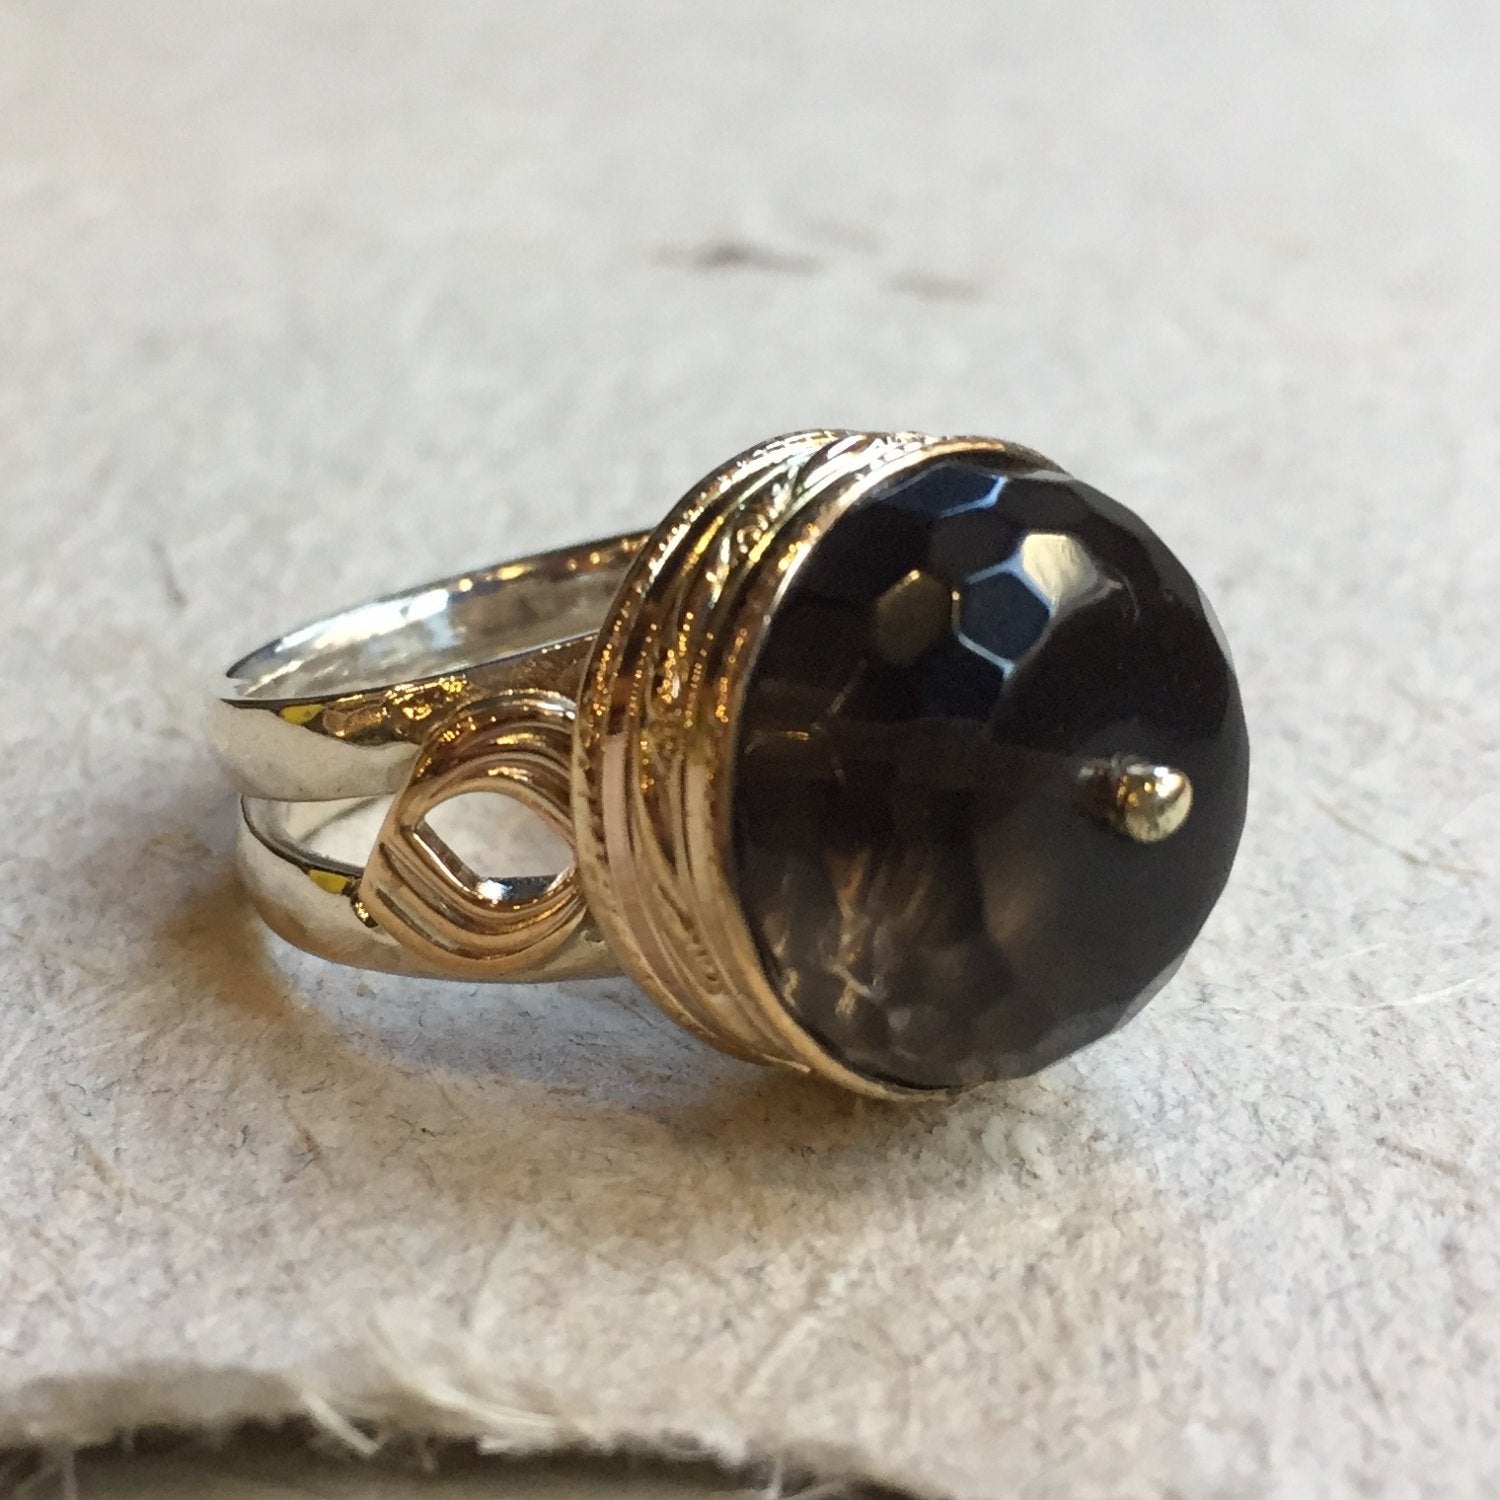 Smoky quartz ring, Sterling silver Gold ring, gemstone ring, stone ring, silver band, statement ring, cocktail ring - Smoke on water R2393